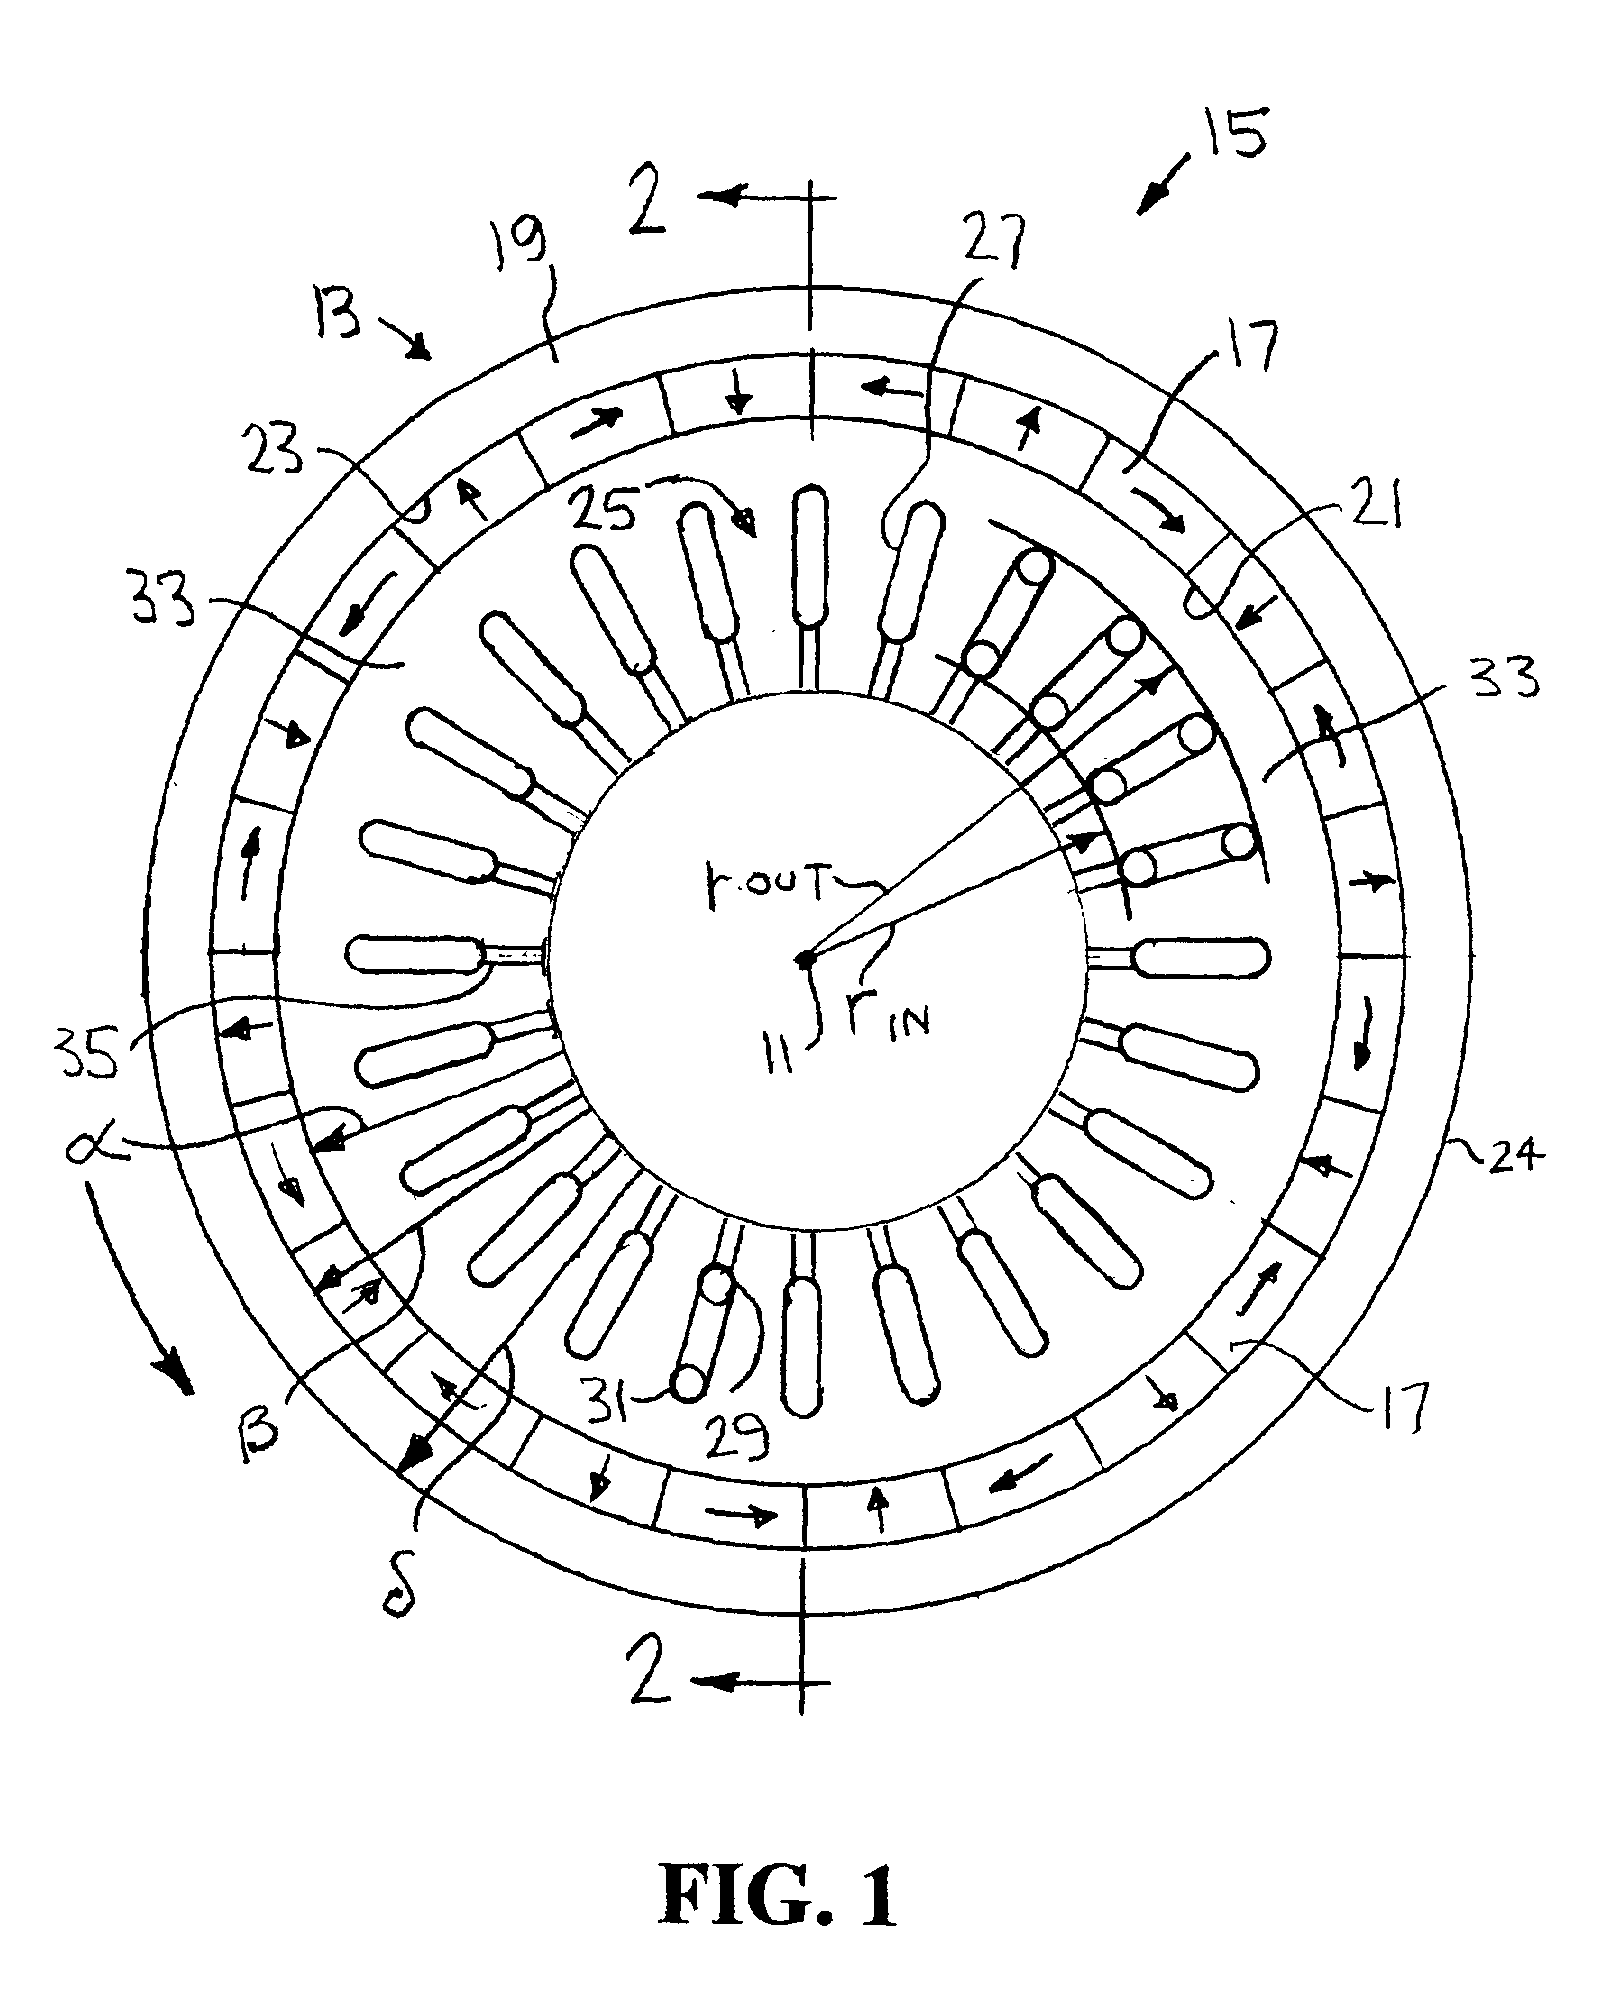 Halbach array generator/motor having an automatically regulated output voltage and mechanical power output